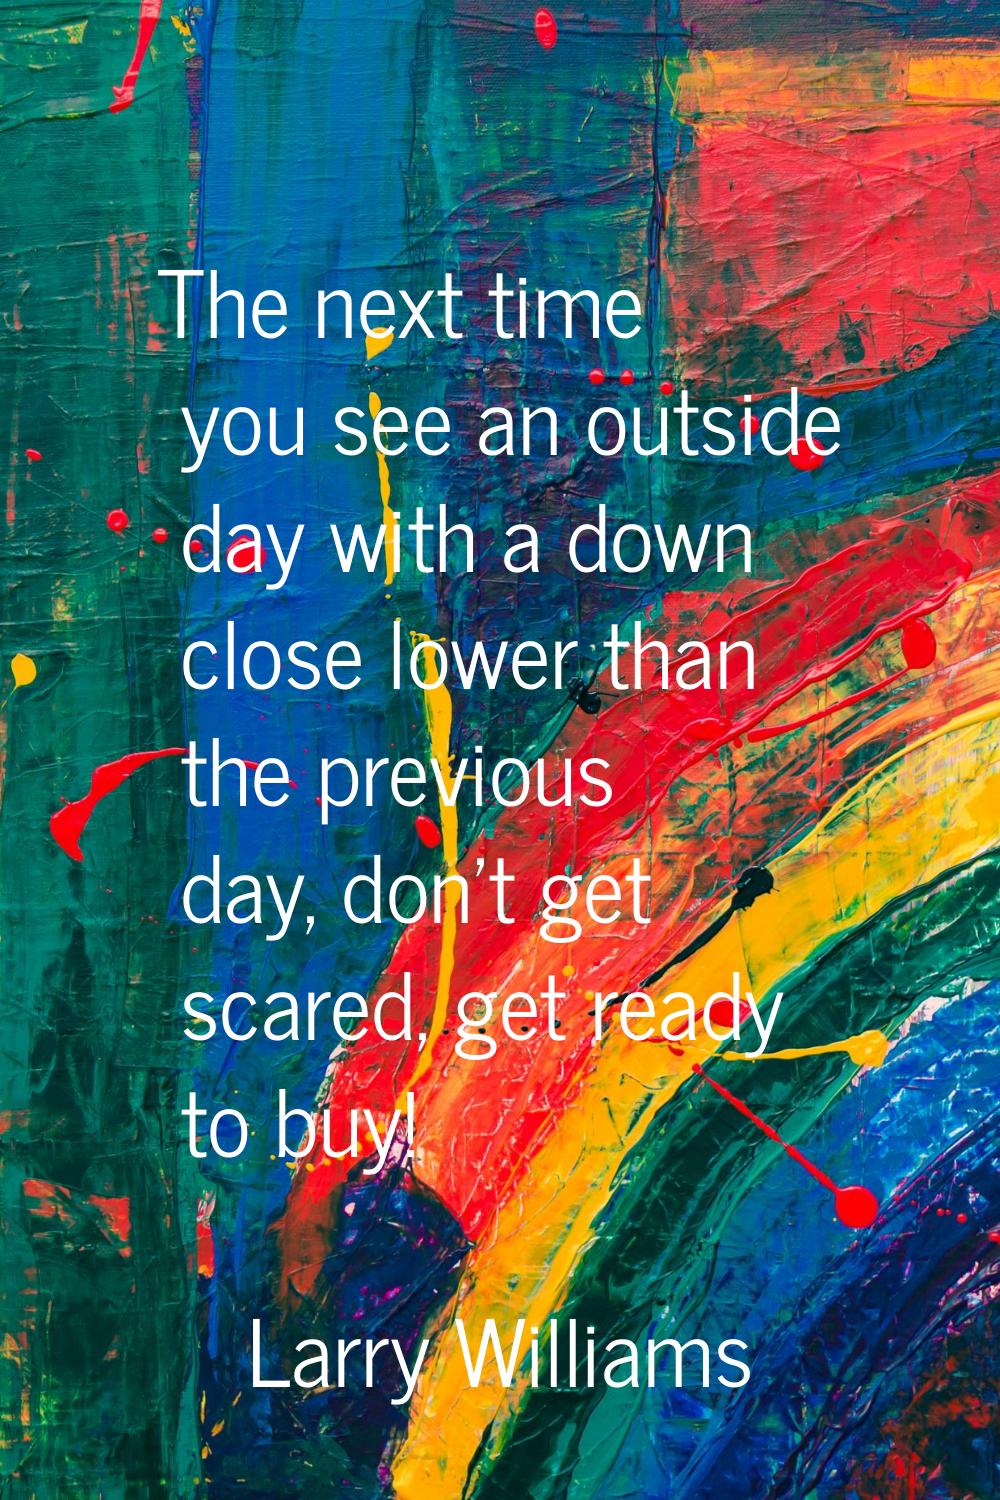 The next time you see an outside day with a down close lower than the previous day, don't get scare